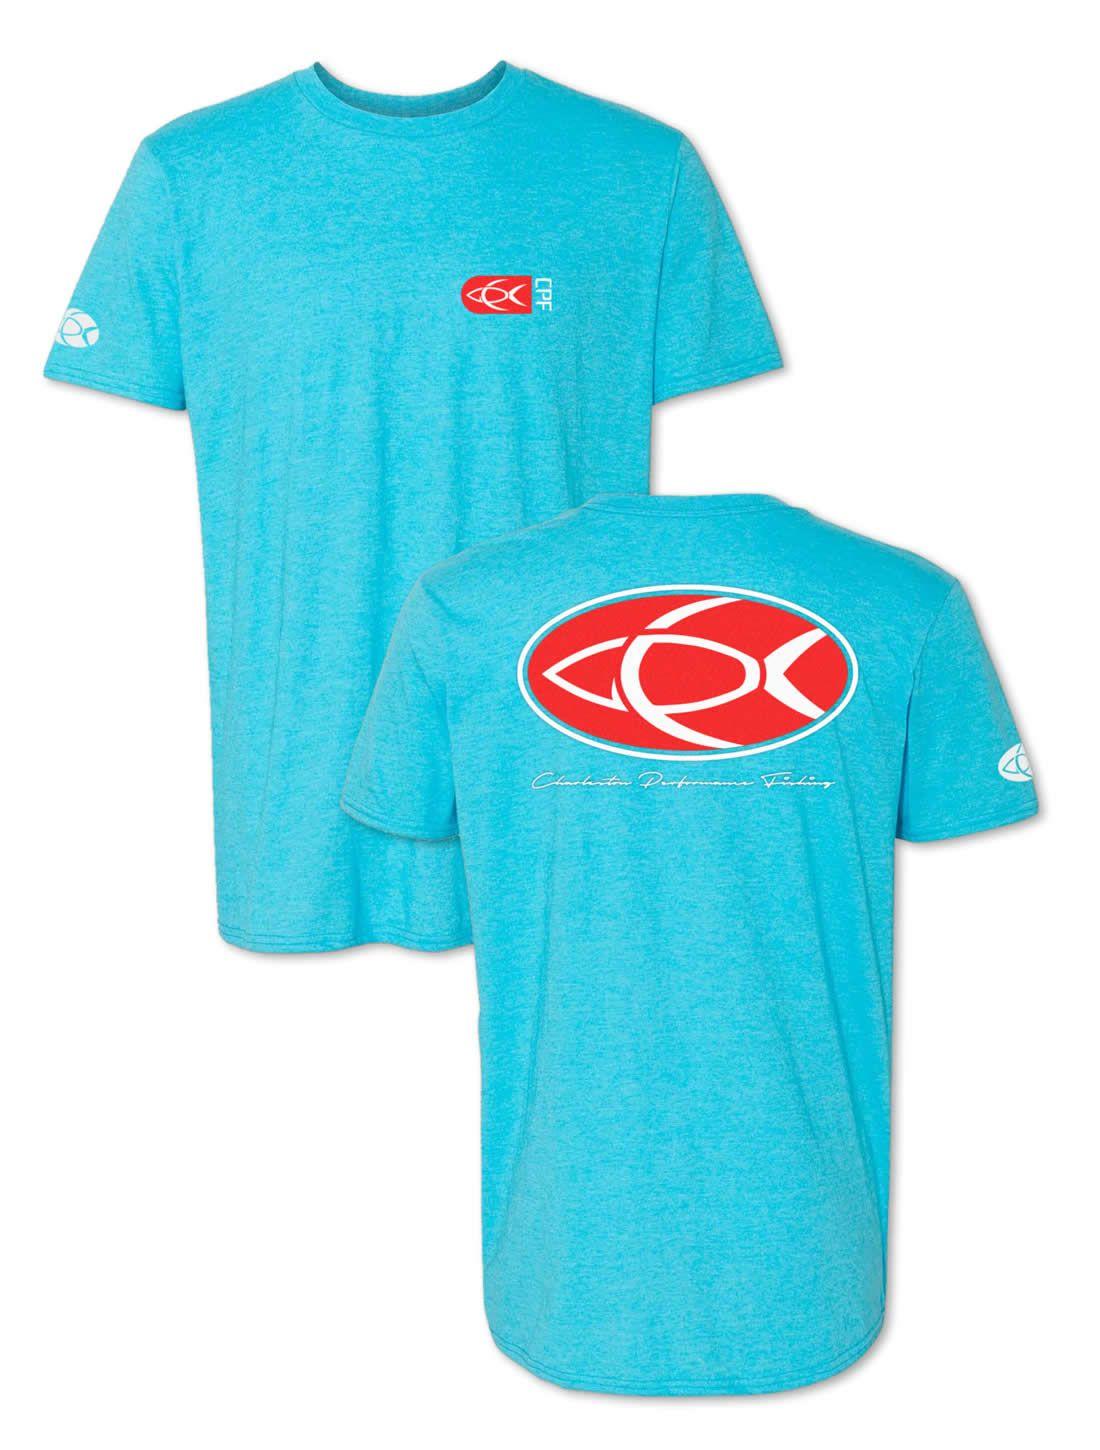 Red and Blue Oval Logo - Oval Back Red Graphic Aqua Blue Fishing T Shirt